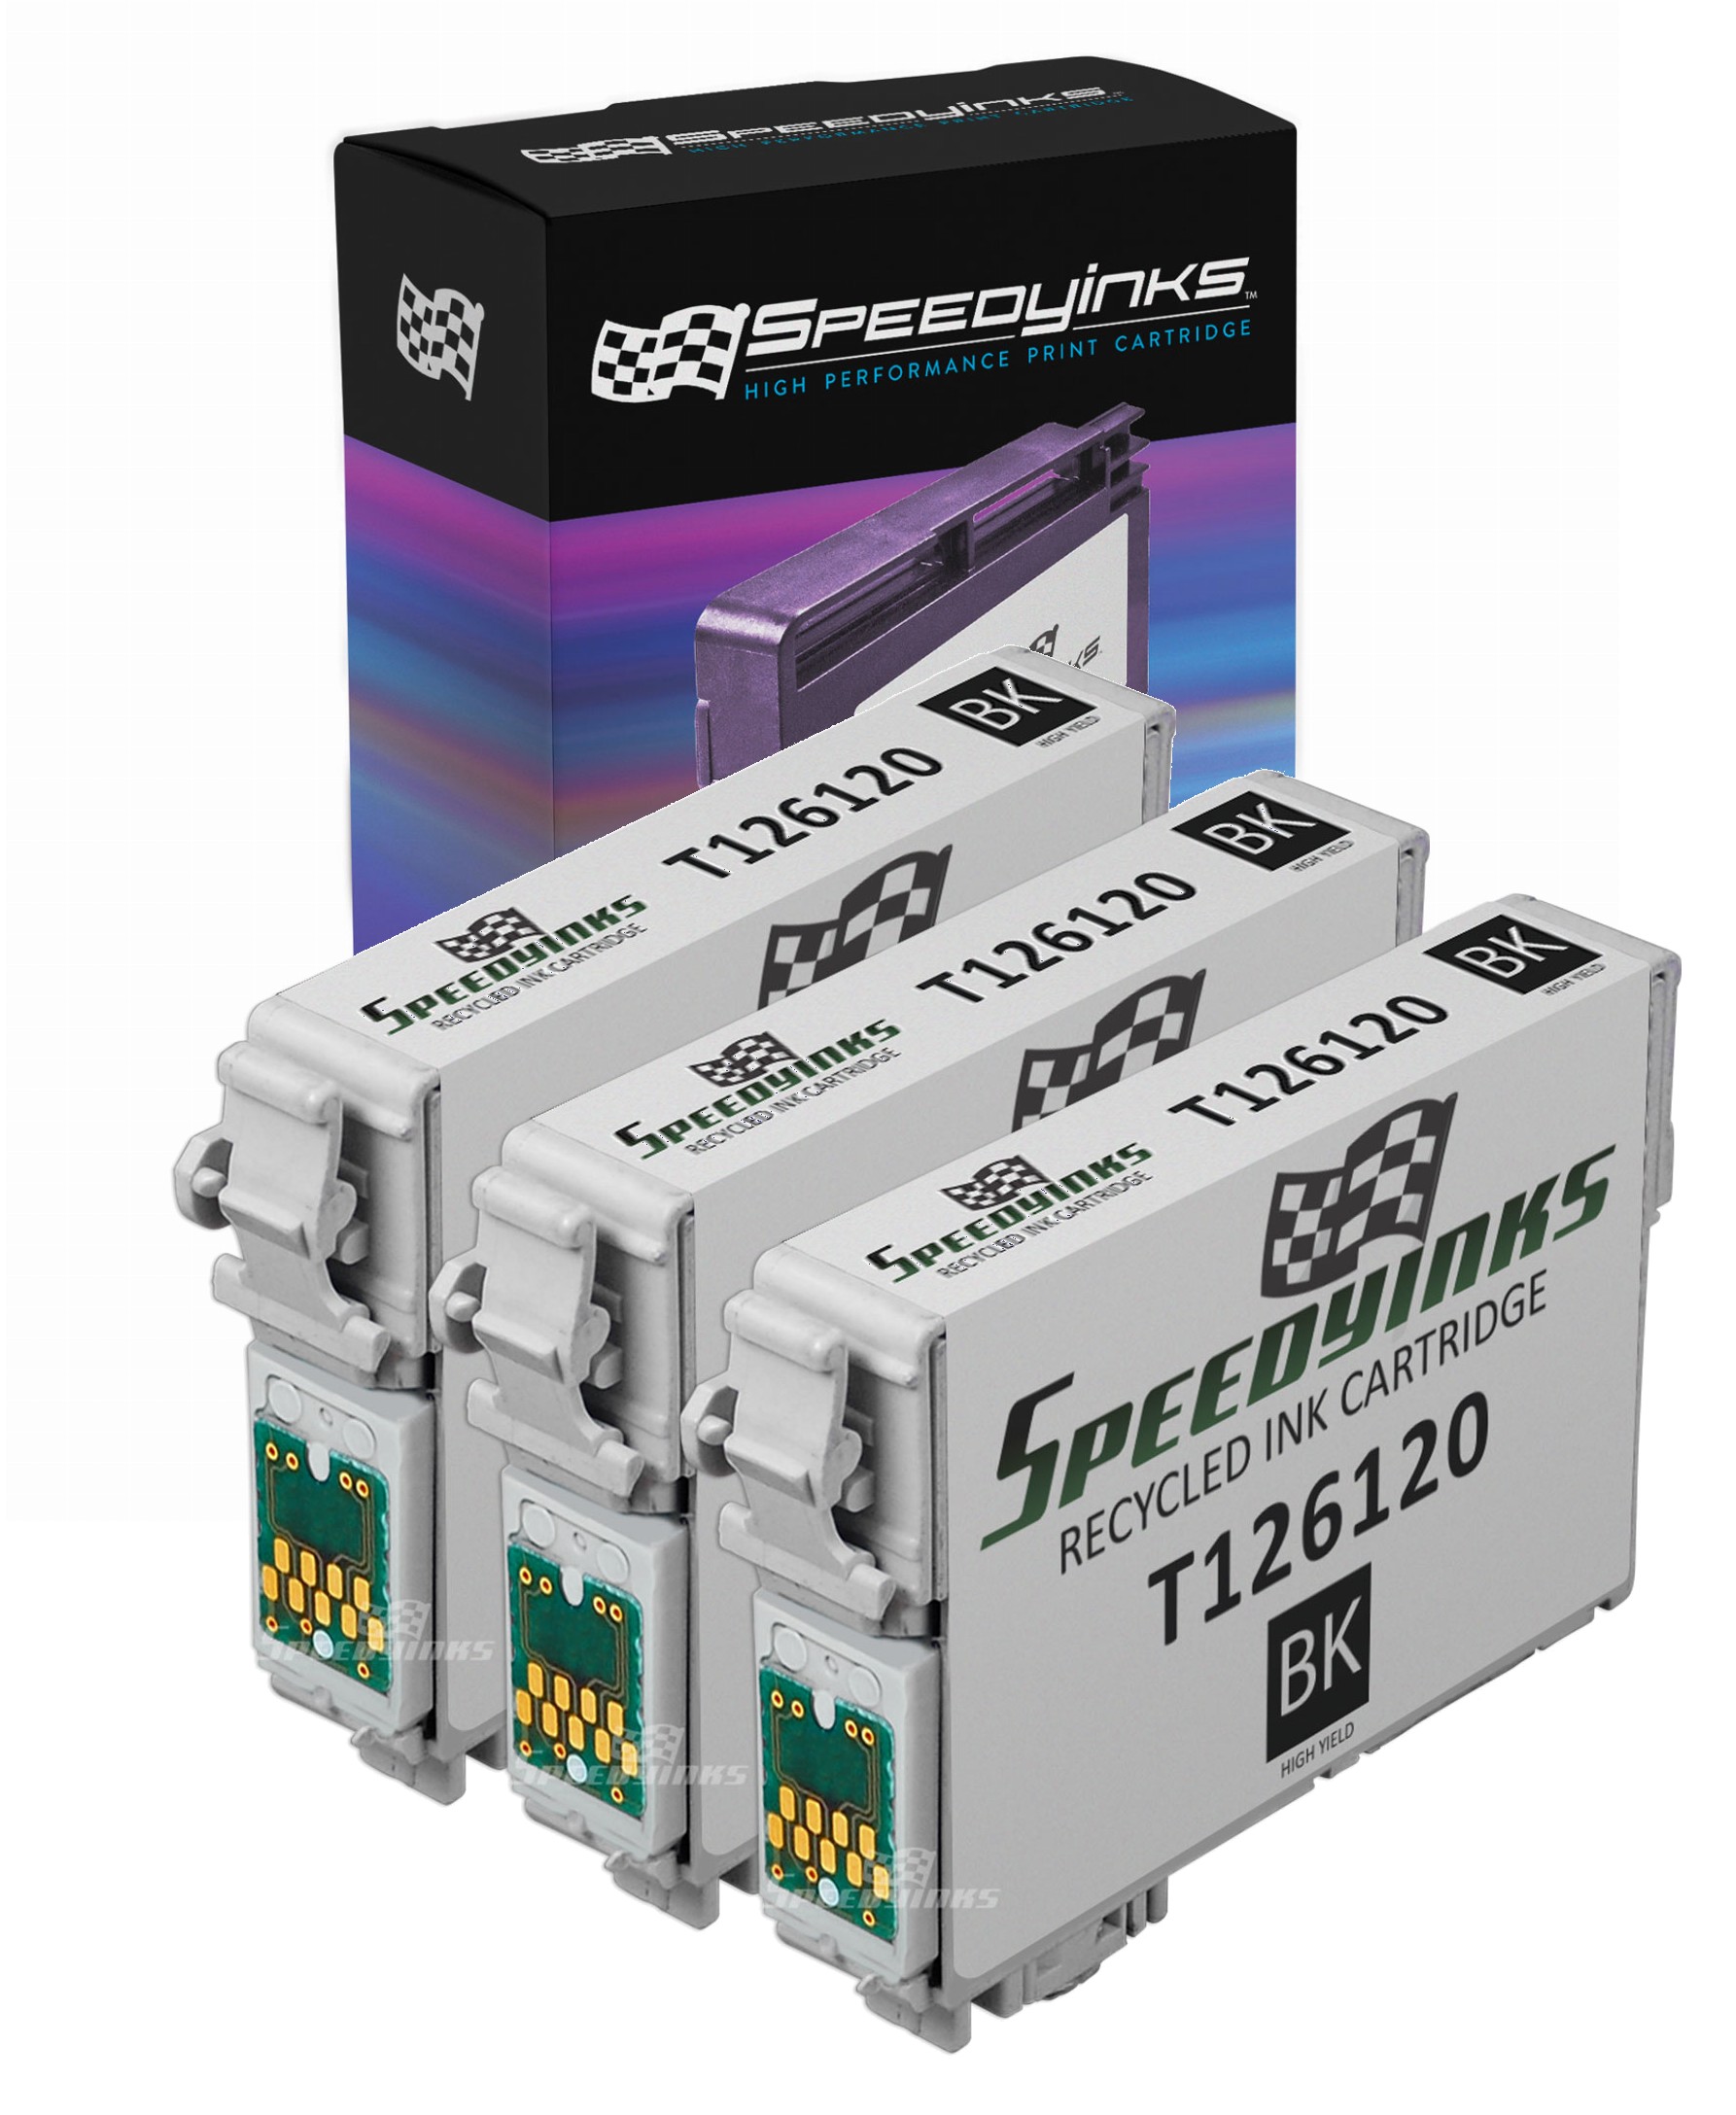 Speedy Inks - 3pk Remanufactured Replacement for Epson T126 T126120 T1261 High Capacity Black Pigment Based Ink Cartridge for use in 520, 630, 633, 635, 60, 840, Epson Stylus NX430, 435, 545, 645 - image 1 of 3